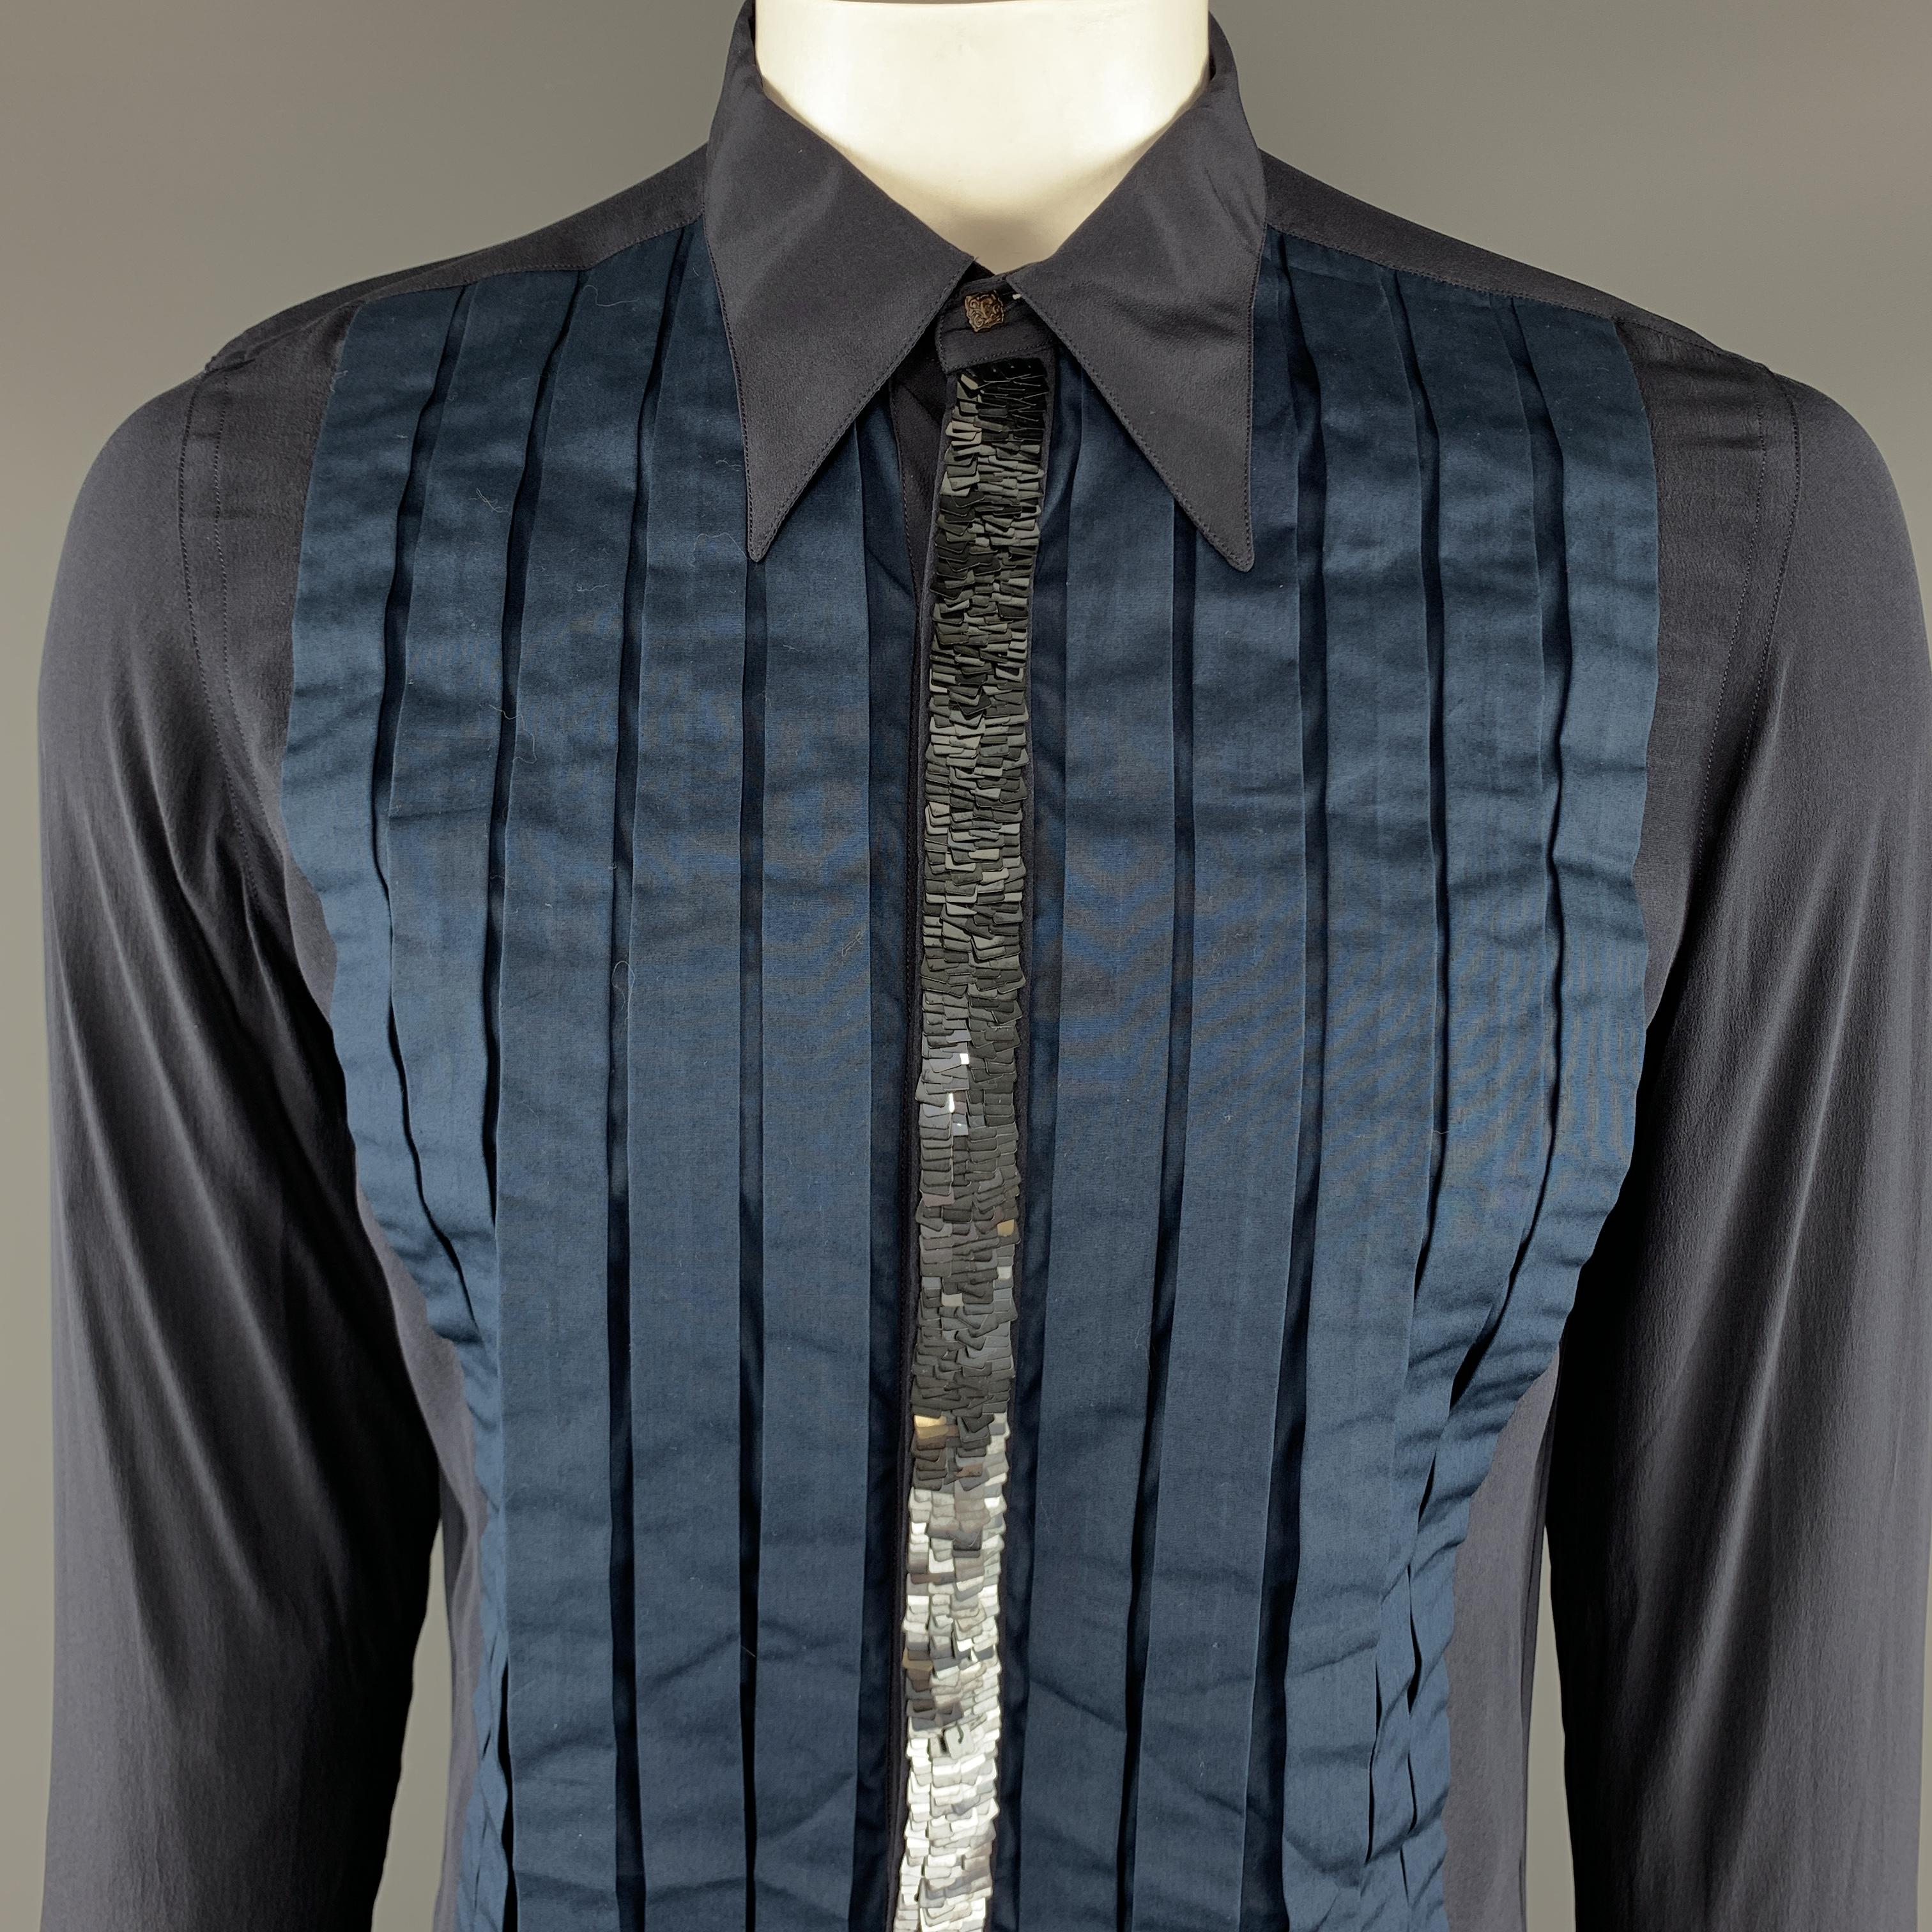 ROBERTO CAVALLI Long Sleeve Shirt comes in navy tones in a solid silk material, with a 